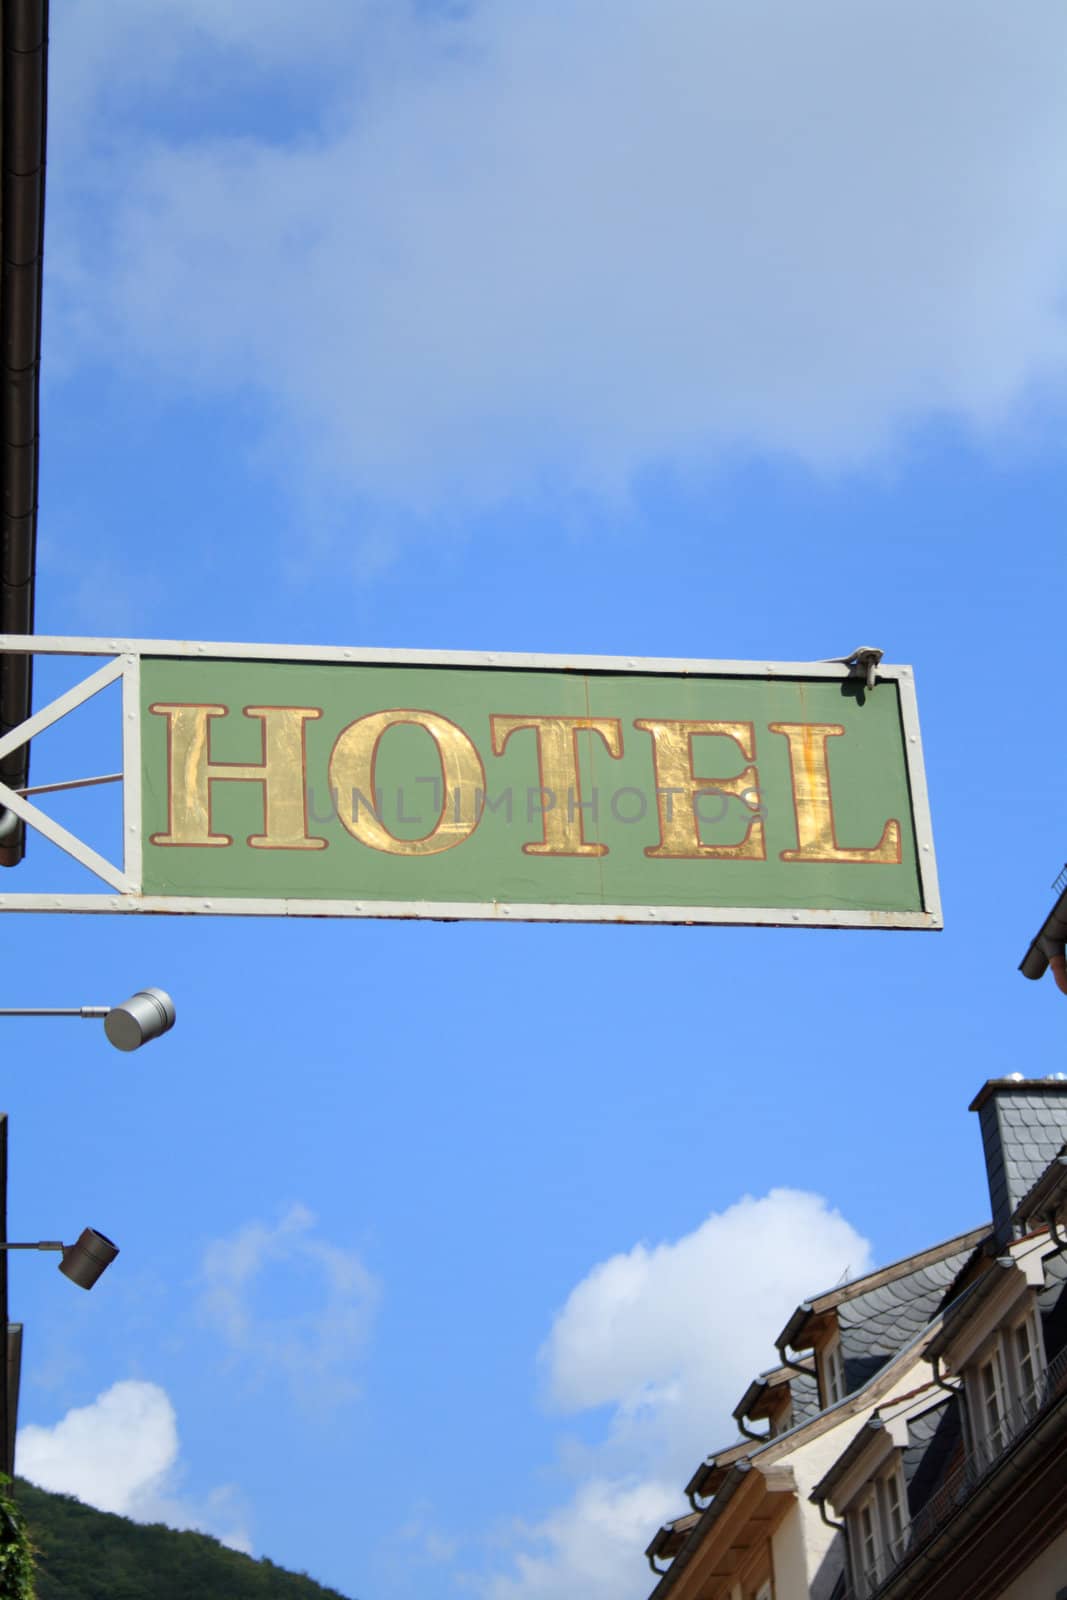 Hotel sign by toneteam